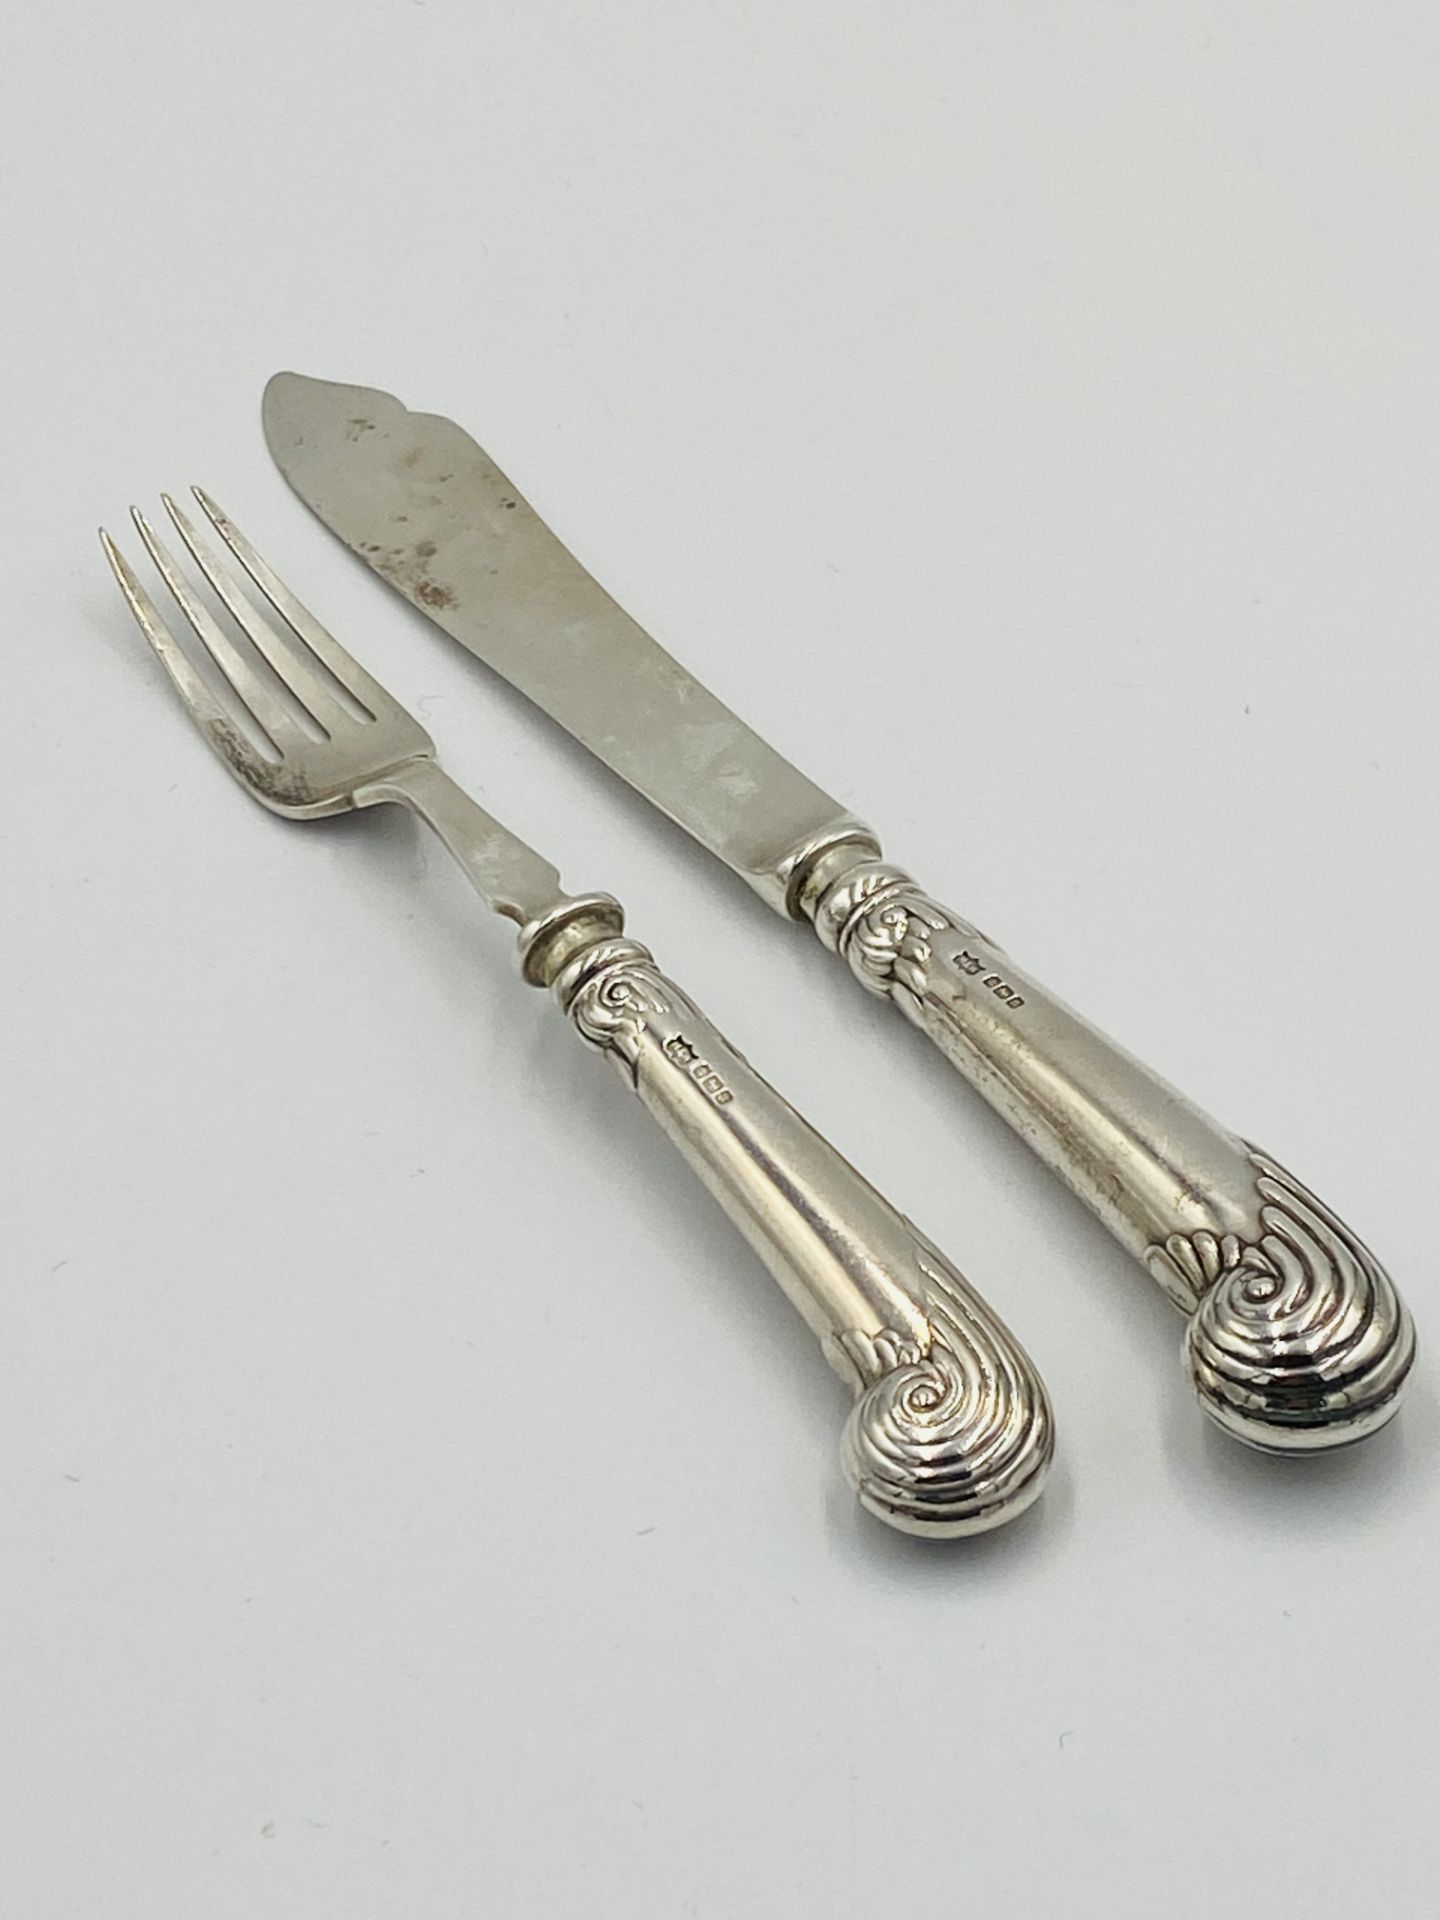 Twelve place set of silver pistol grip fish knives and forks, London 1905 - Image 4 of 11